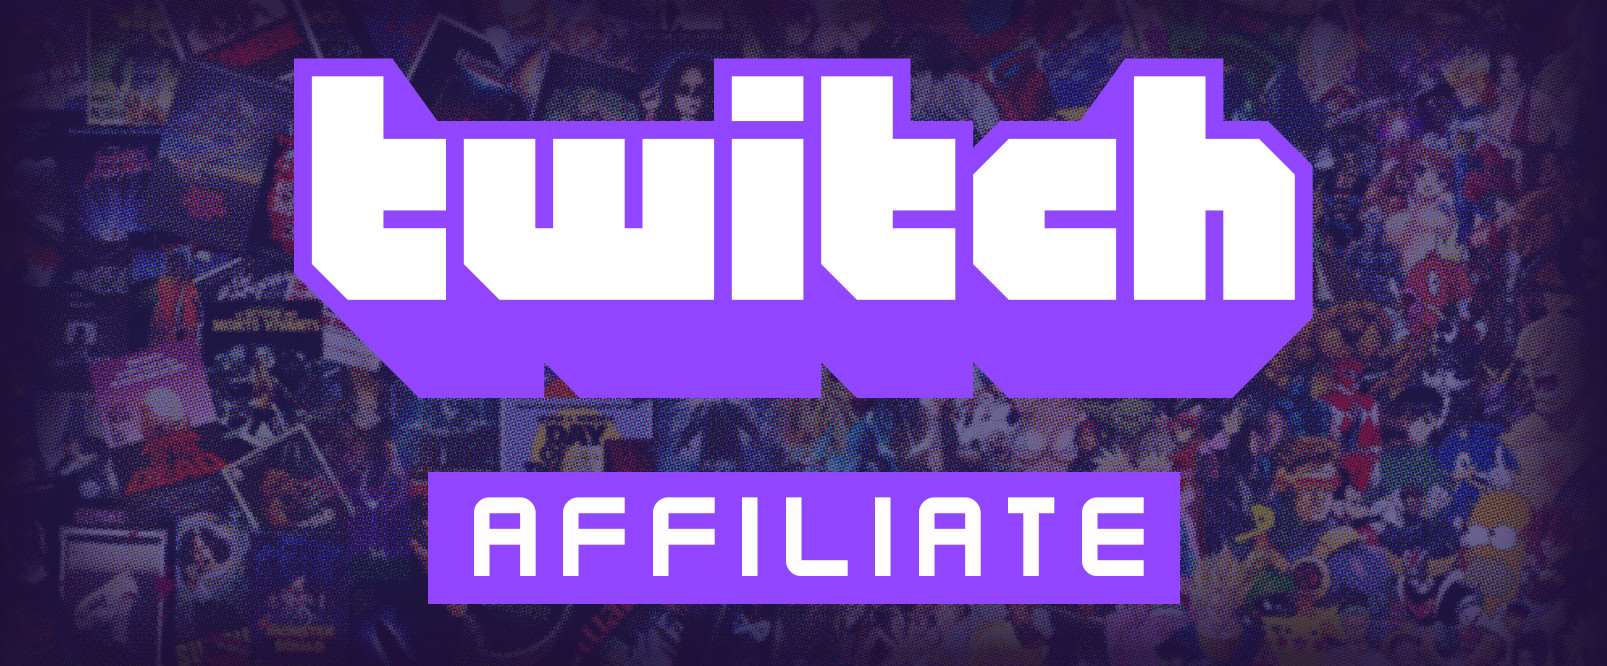 Twitch affiliate requirements